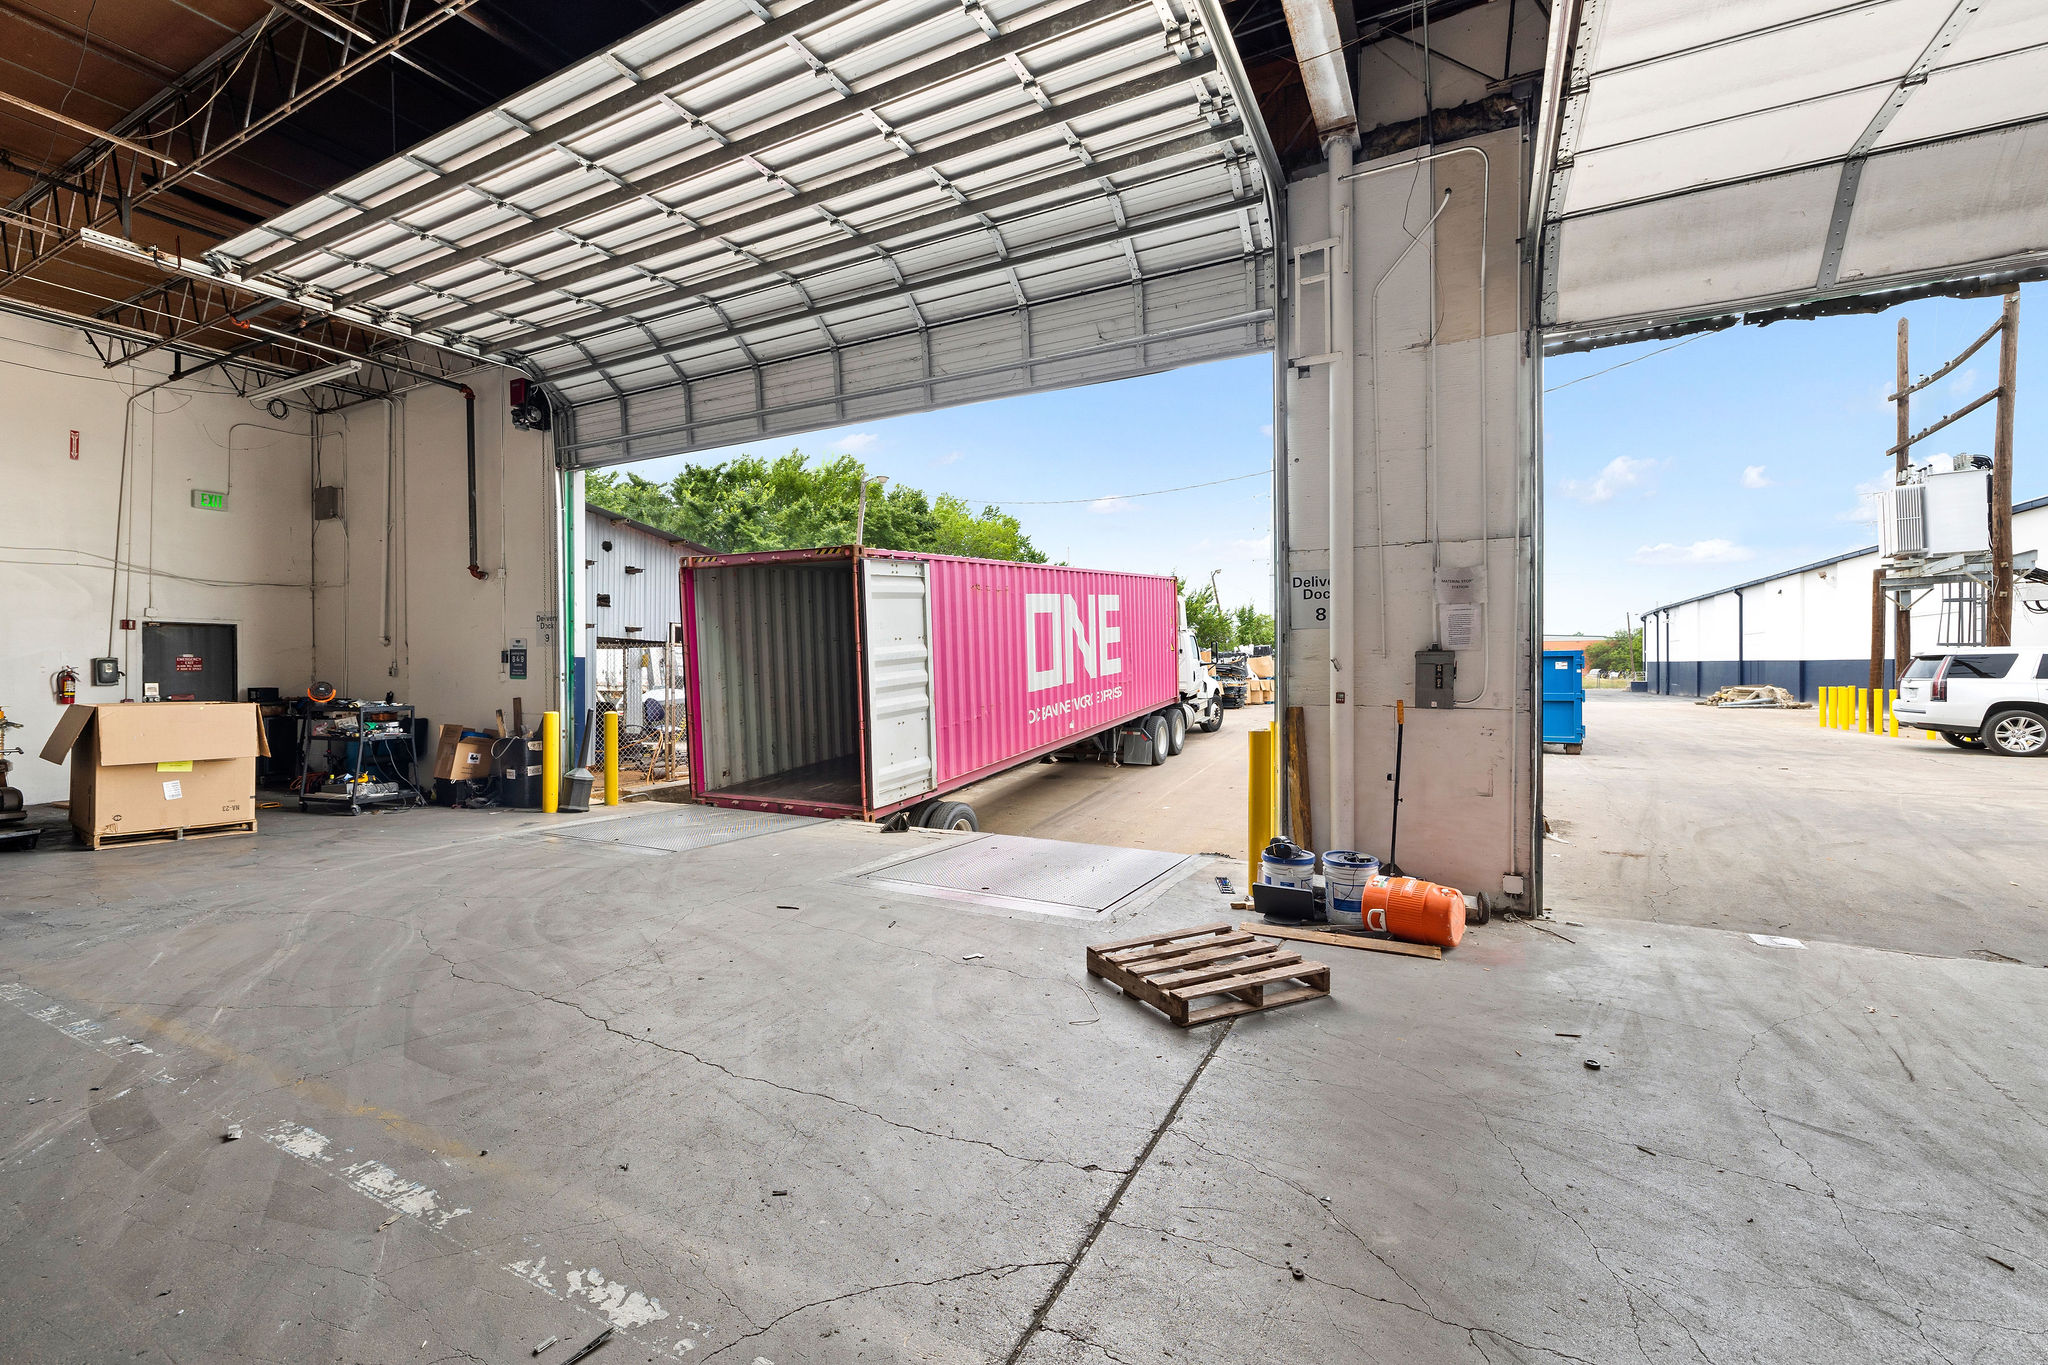 Shared Warehouse Space Loading Docks University South Fort Worth Texas